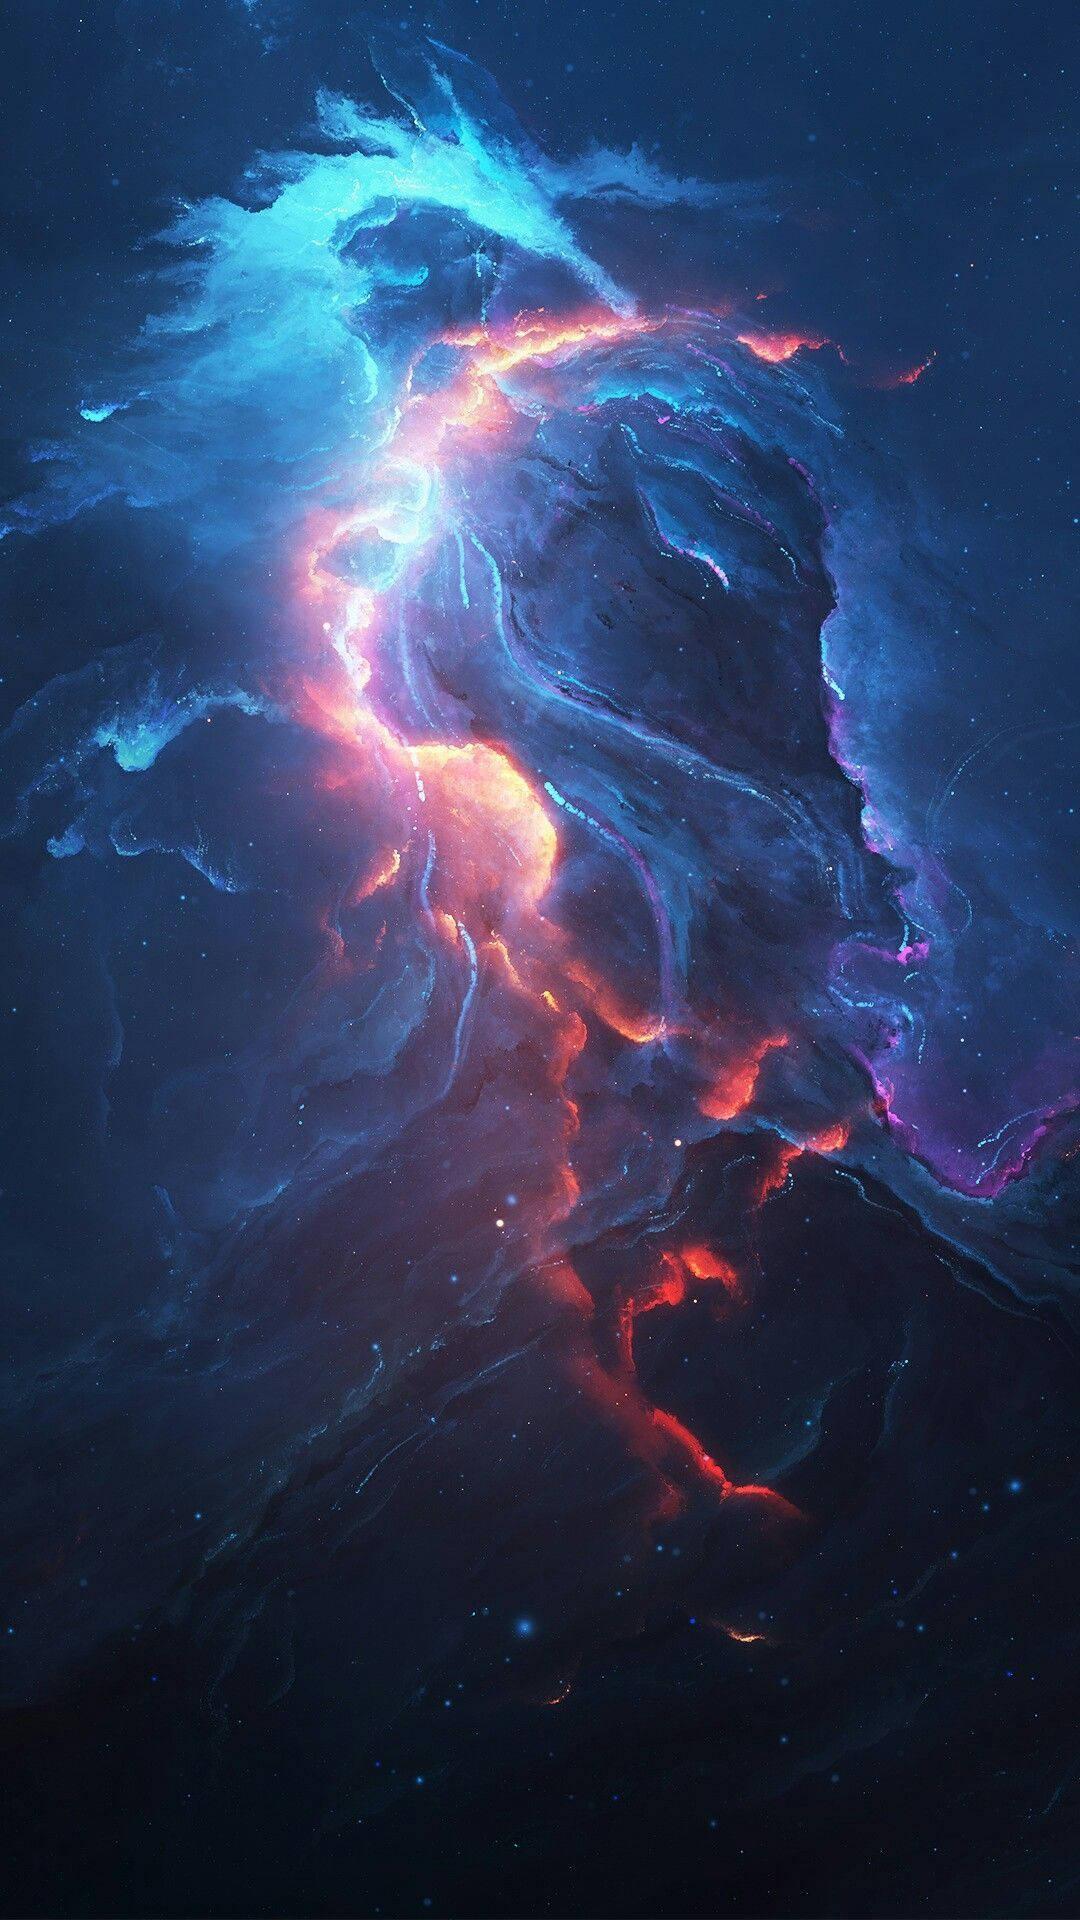 Cool Galaxy Dragon Wallpapers - Top Free Cool Galaxy Dragon Backgrounds ...